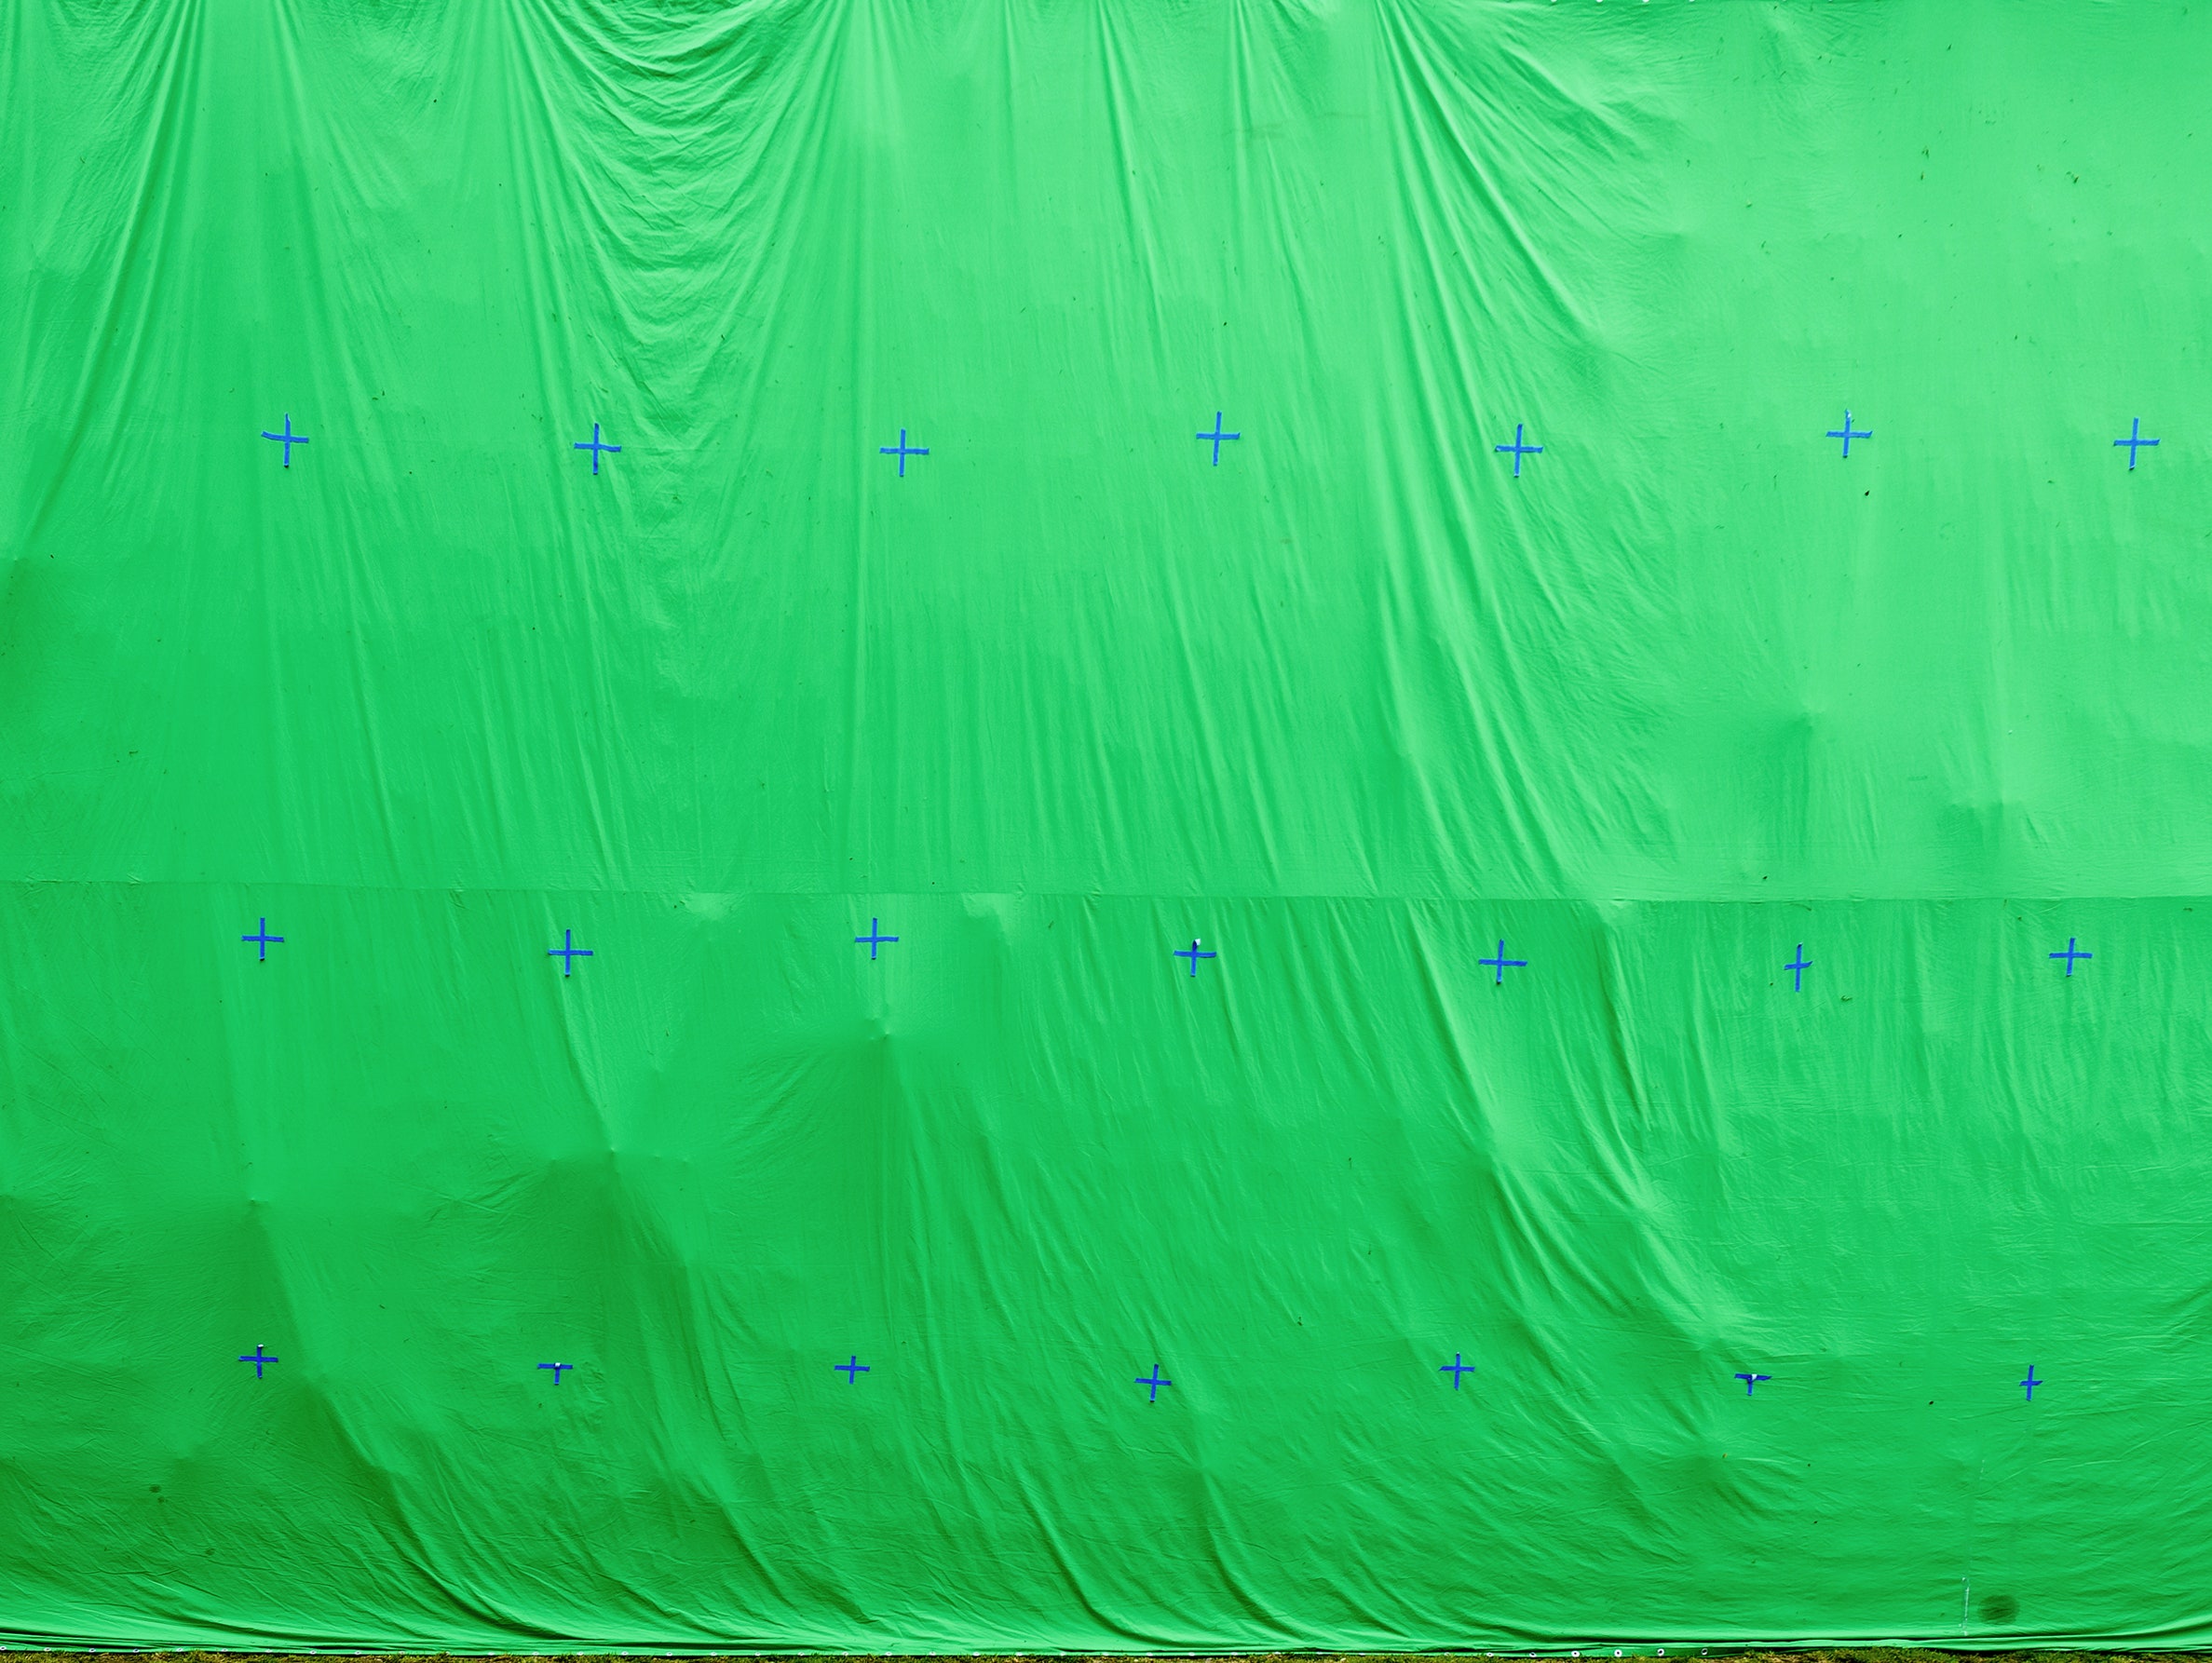 Other Causes Of Green Screens On Android Devices